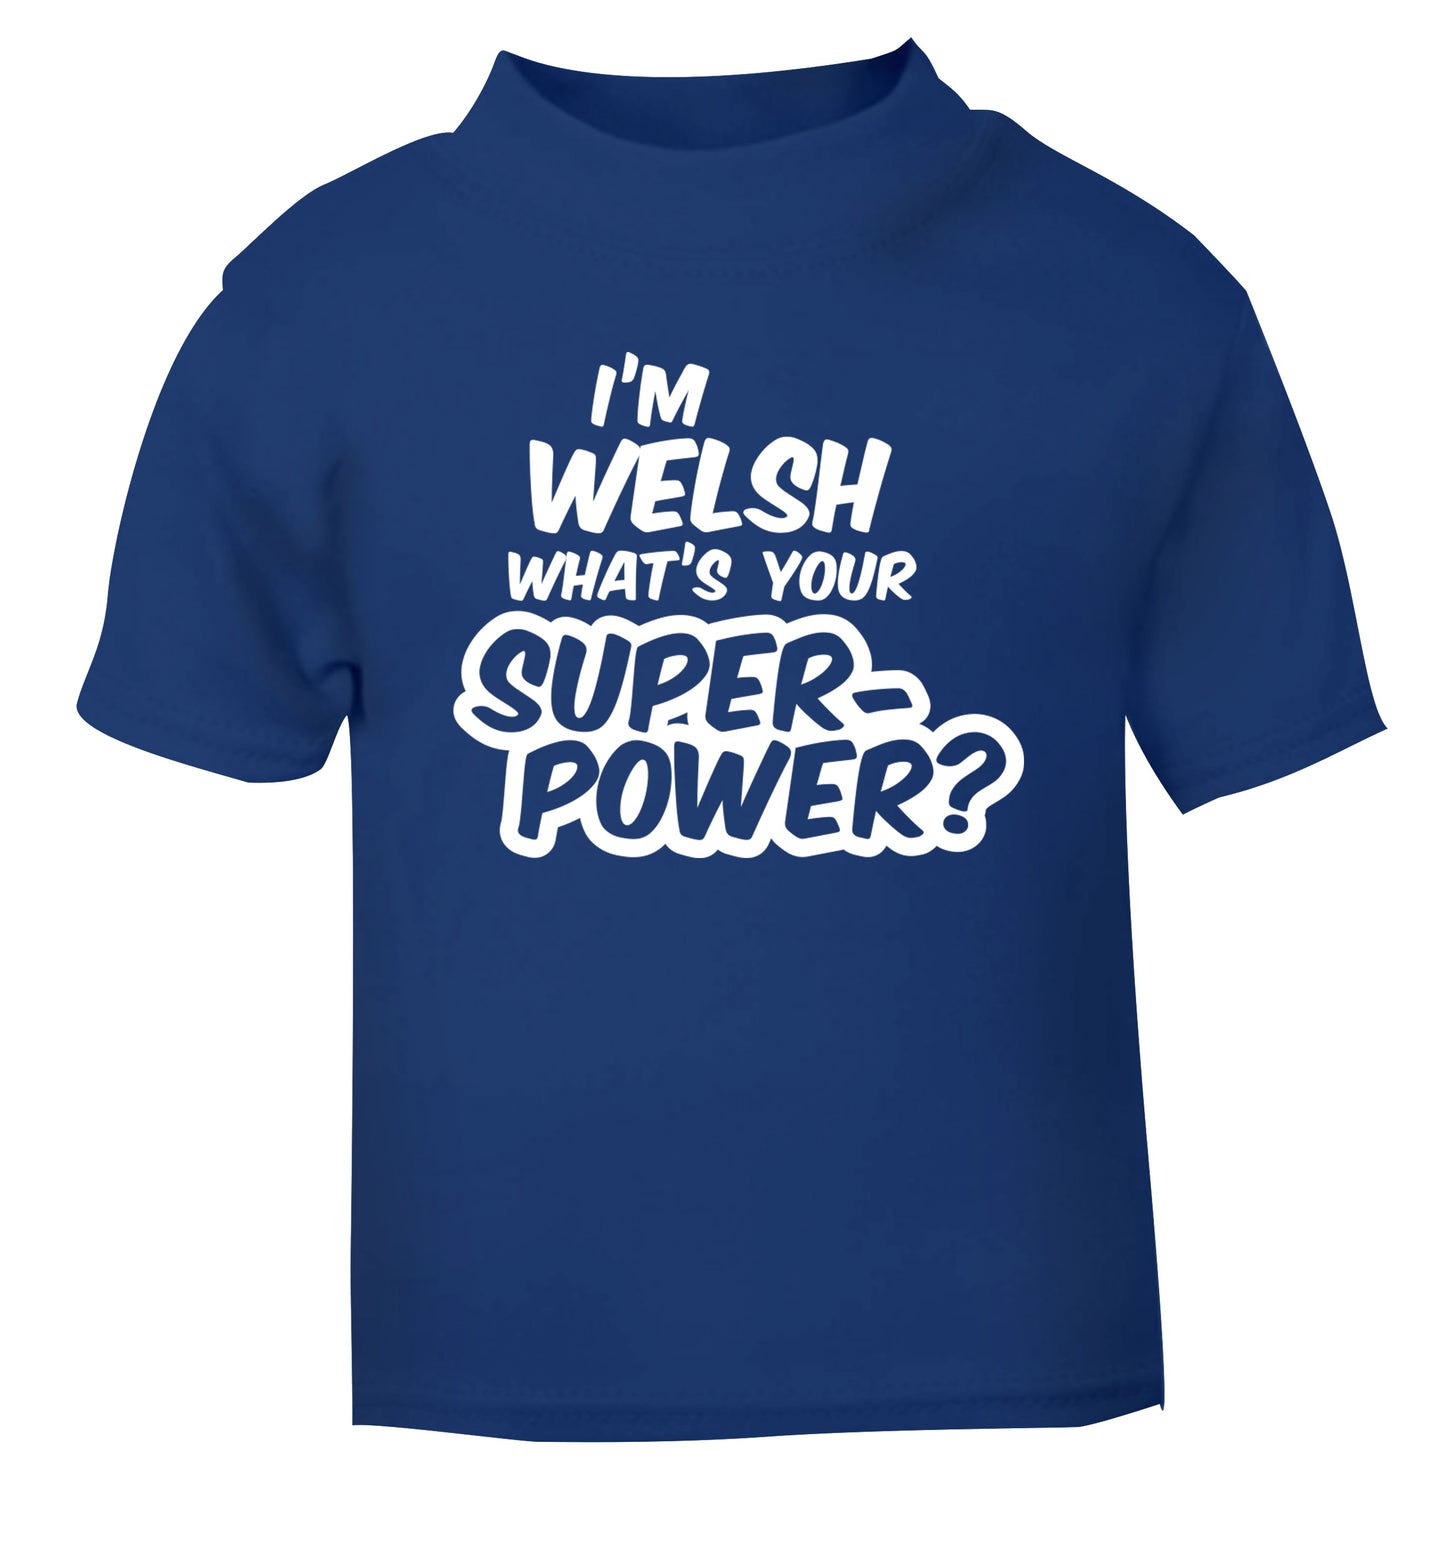 I'm Welsh what's your superpower? blue Baby Toddler Tshirt 2 Years